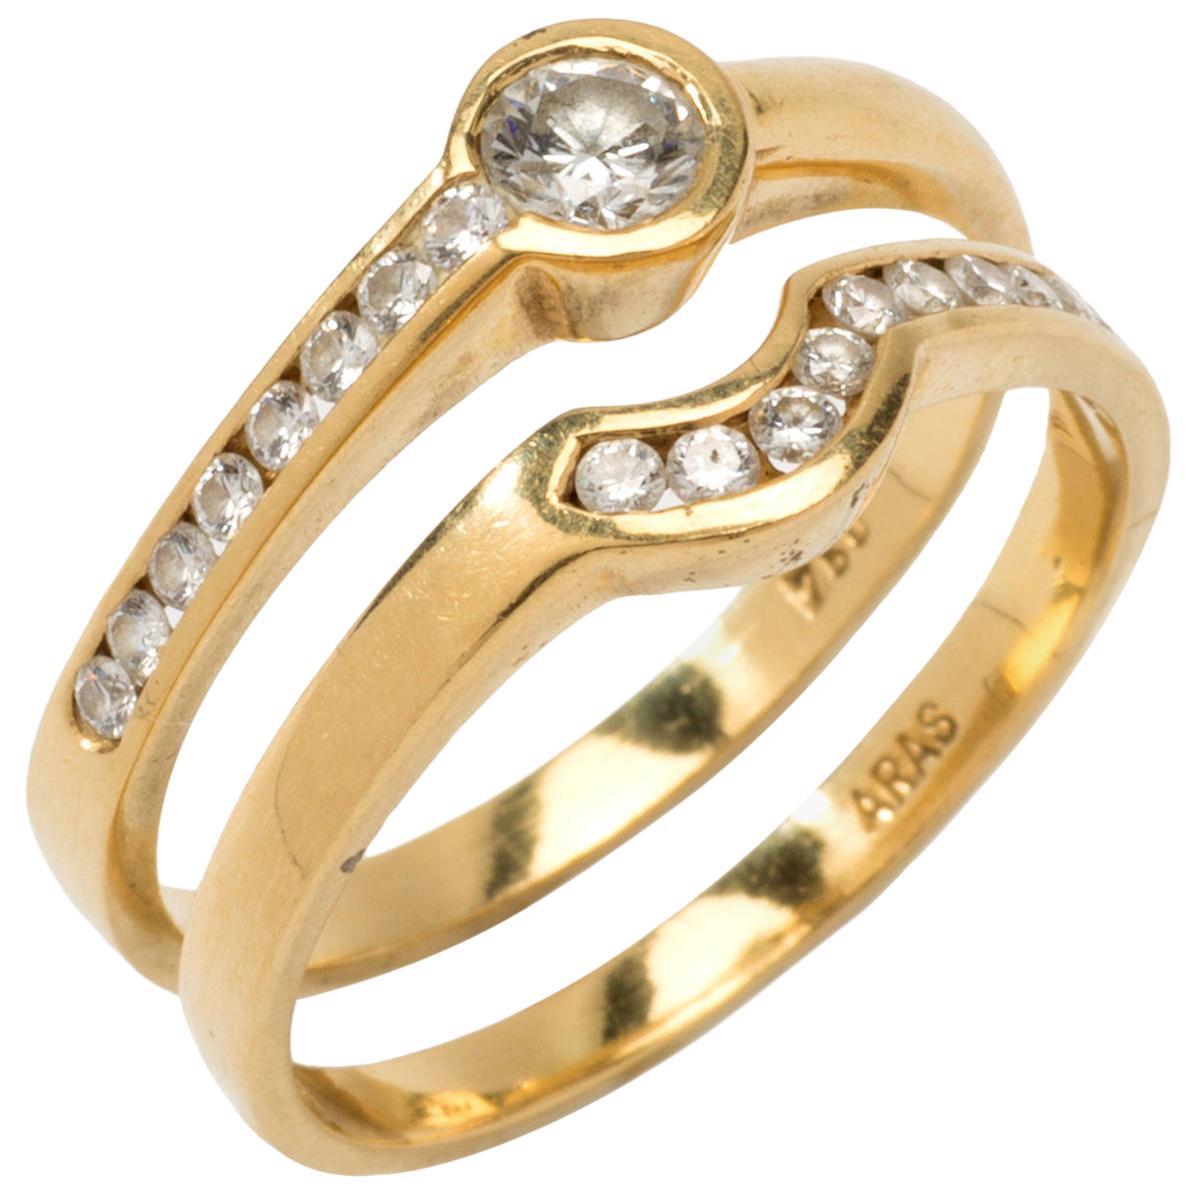 Twin Diamond Gold Rings For Sale